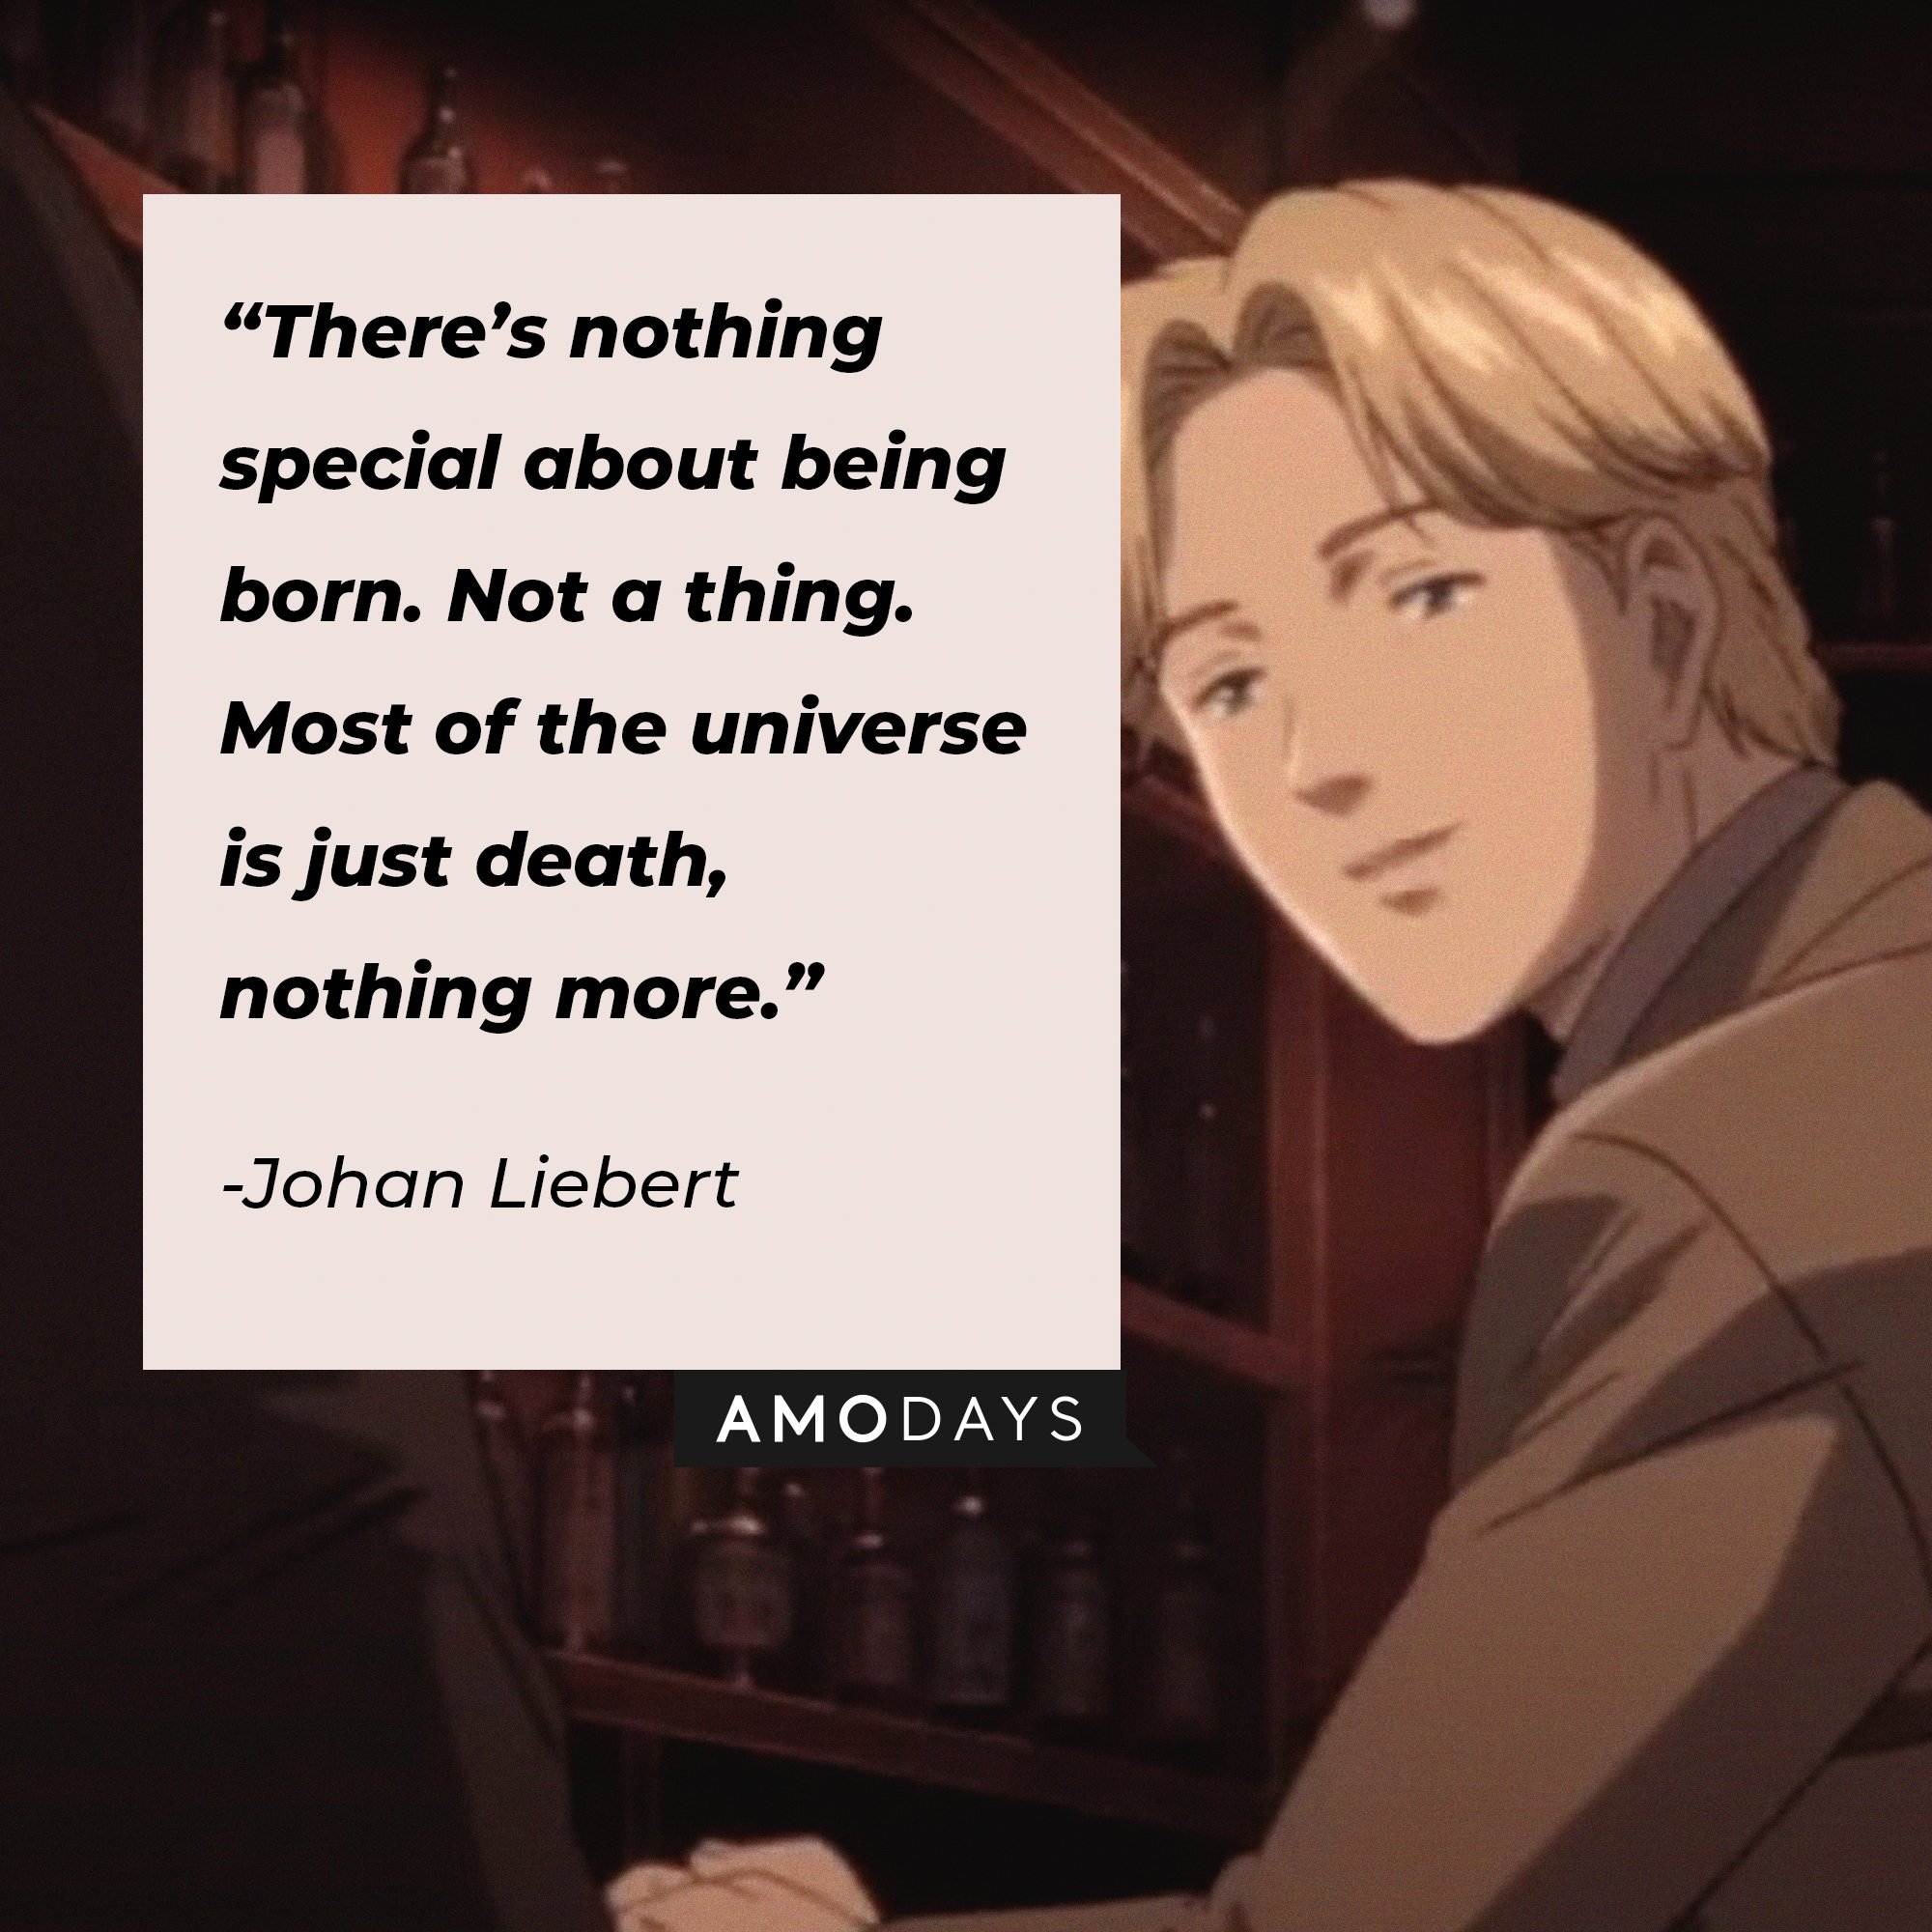 Johan Liebert’s quote: “There's nothing special about being born. Not a thing. Most of the universe is just death, nothing more.” | Image: AmoDays